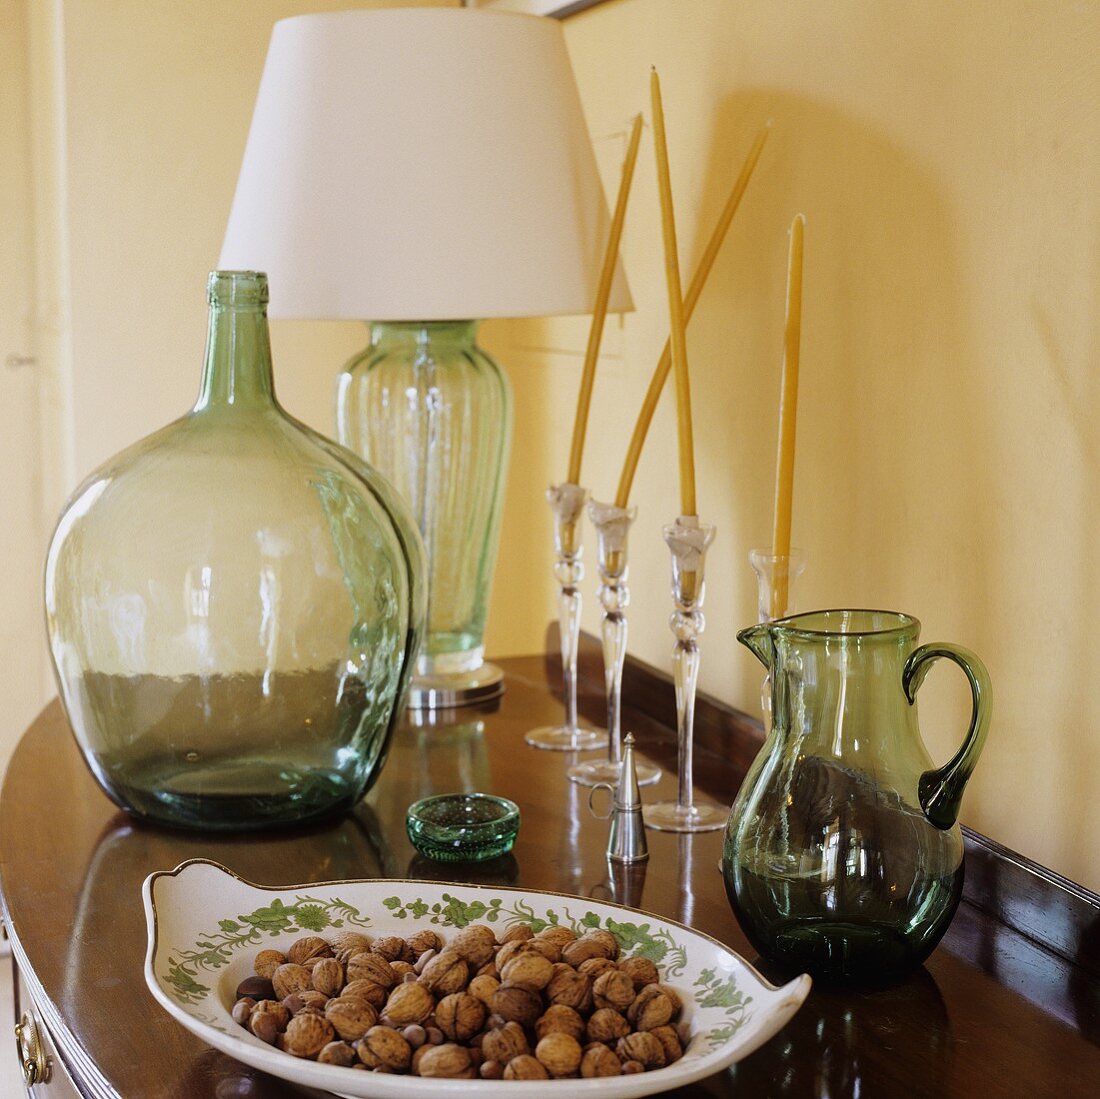 A bowl of nuts and a carafe on a shelf